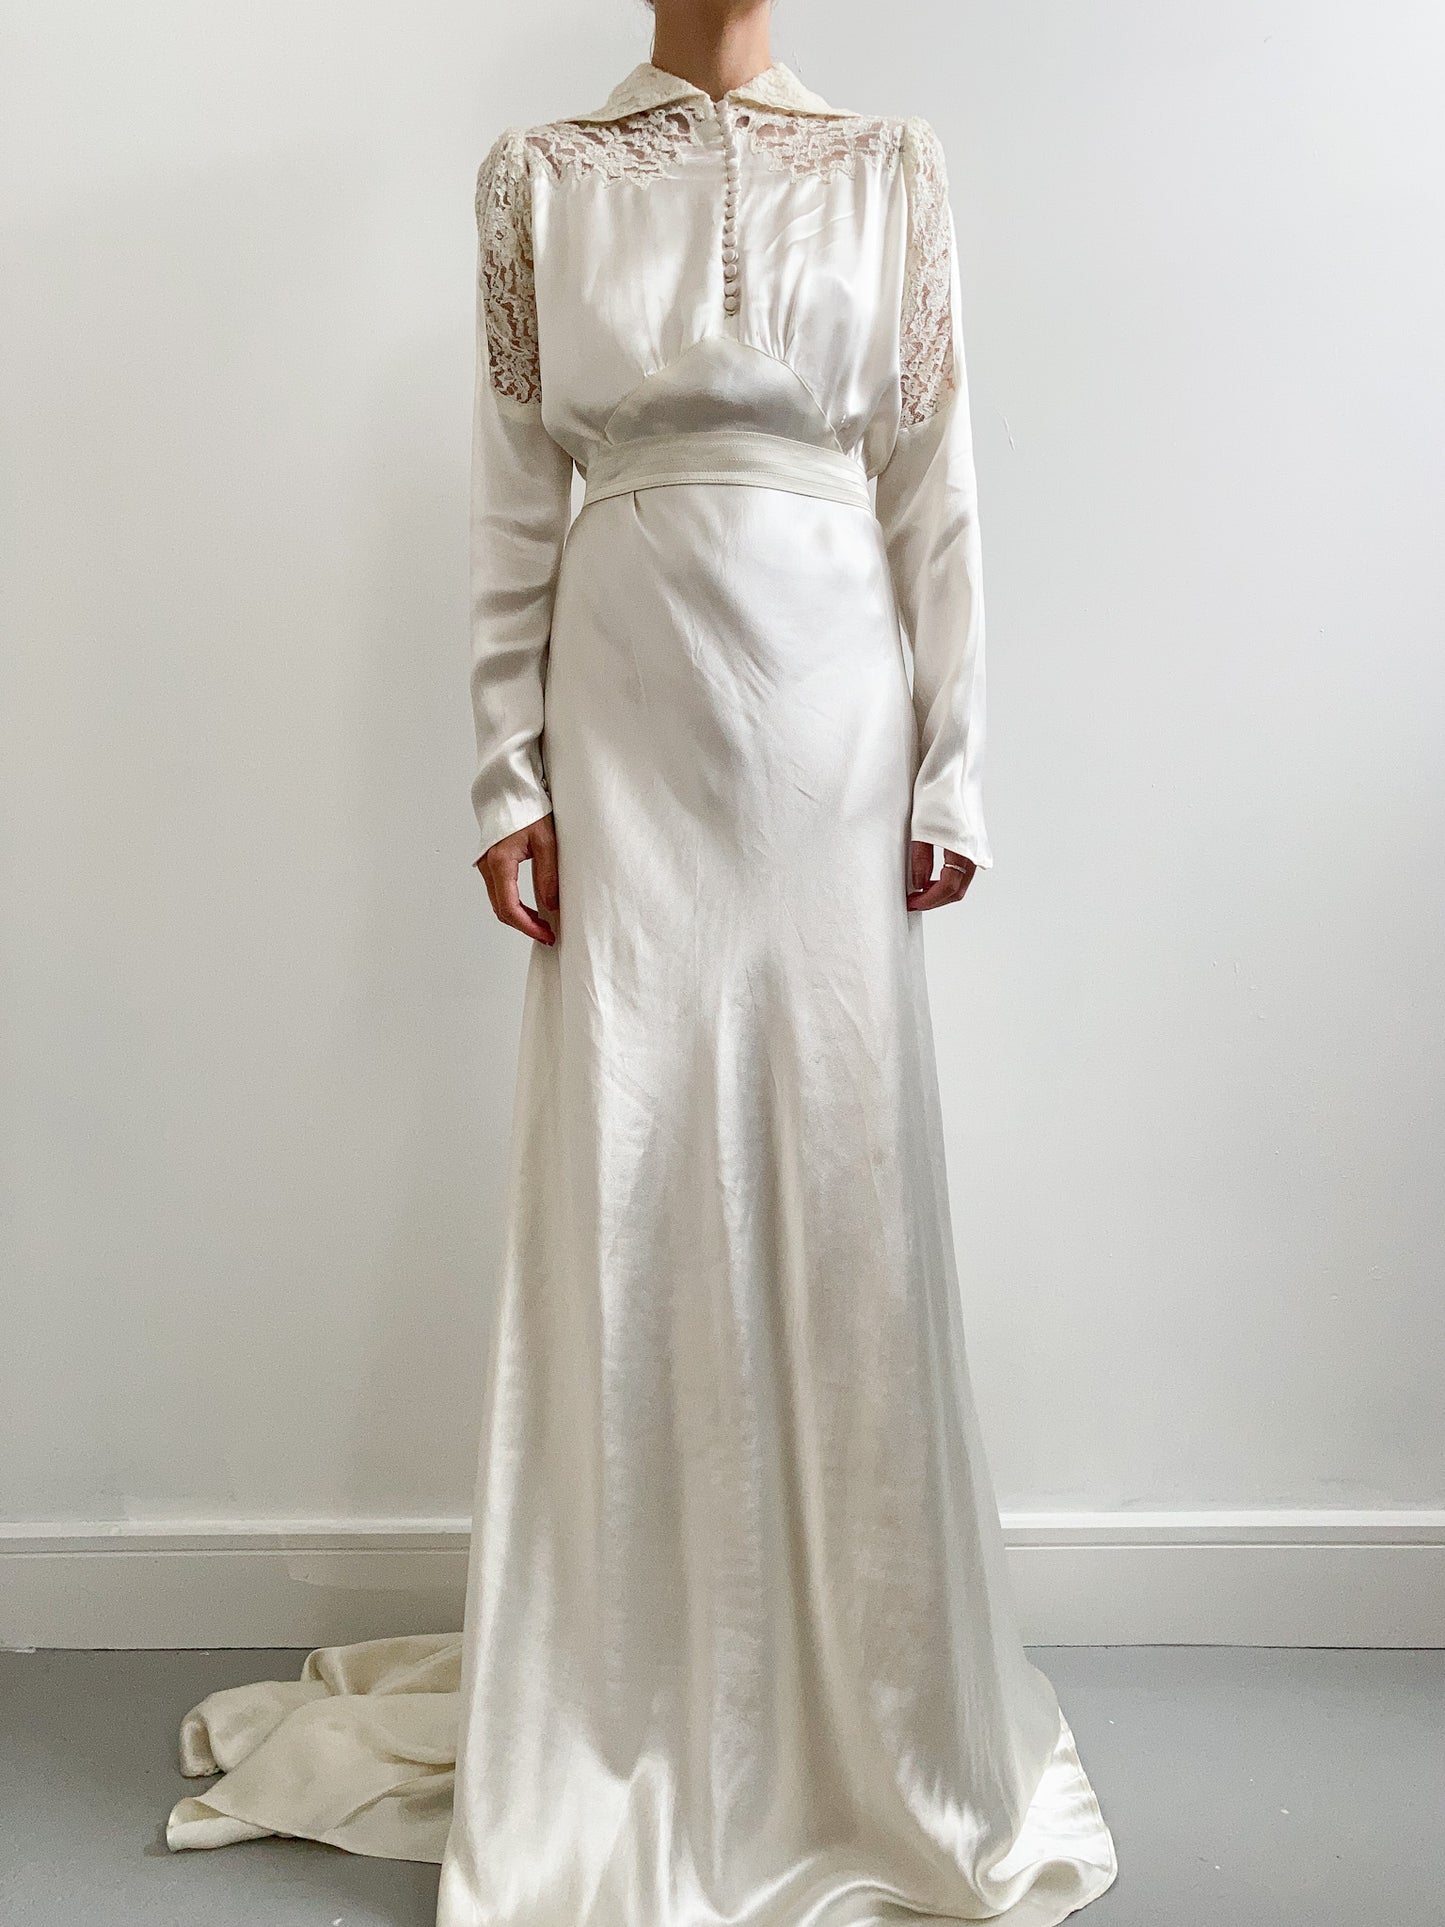 1930s Champagne Silk Satin & Lace Collared Wedding Dress with Train